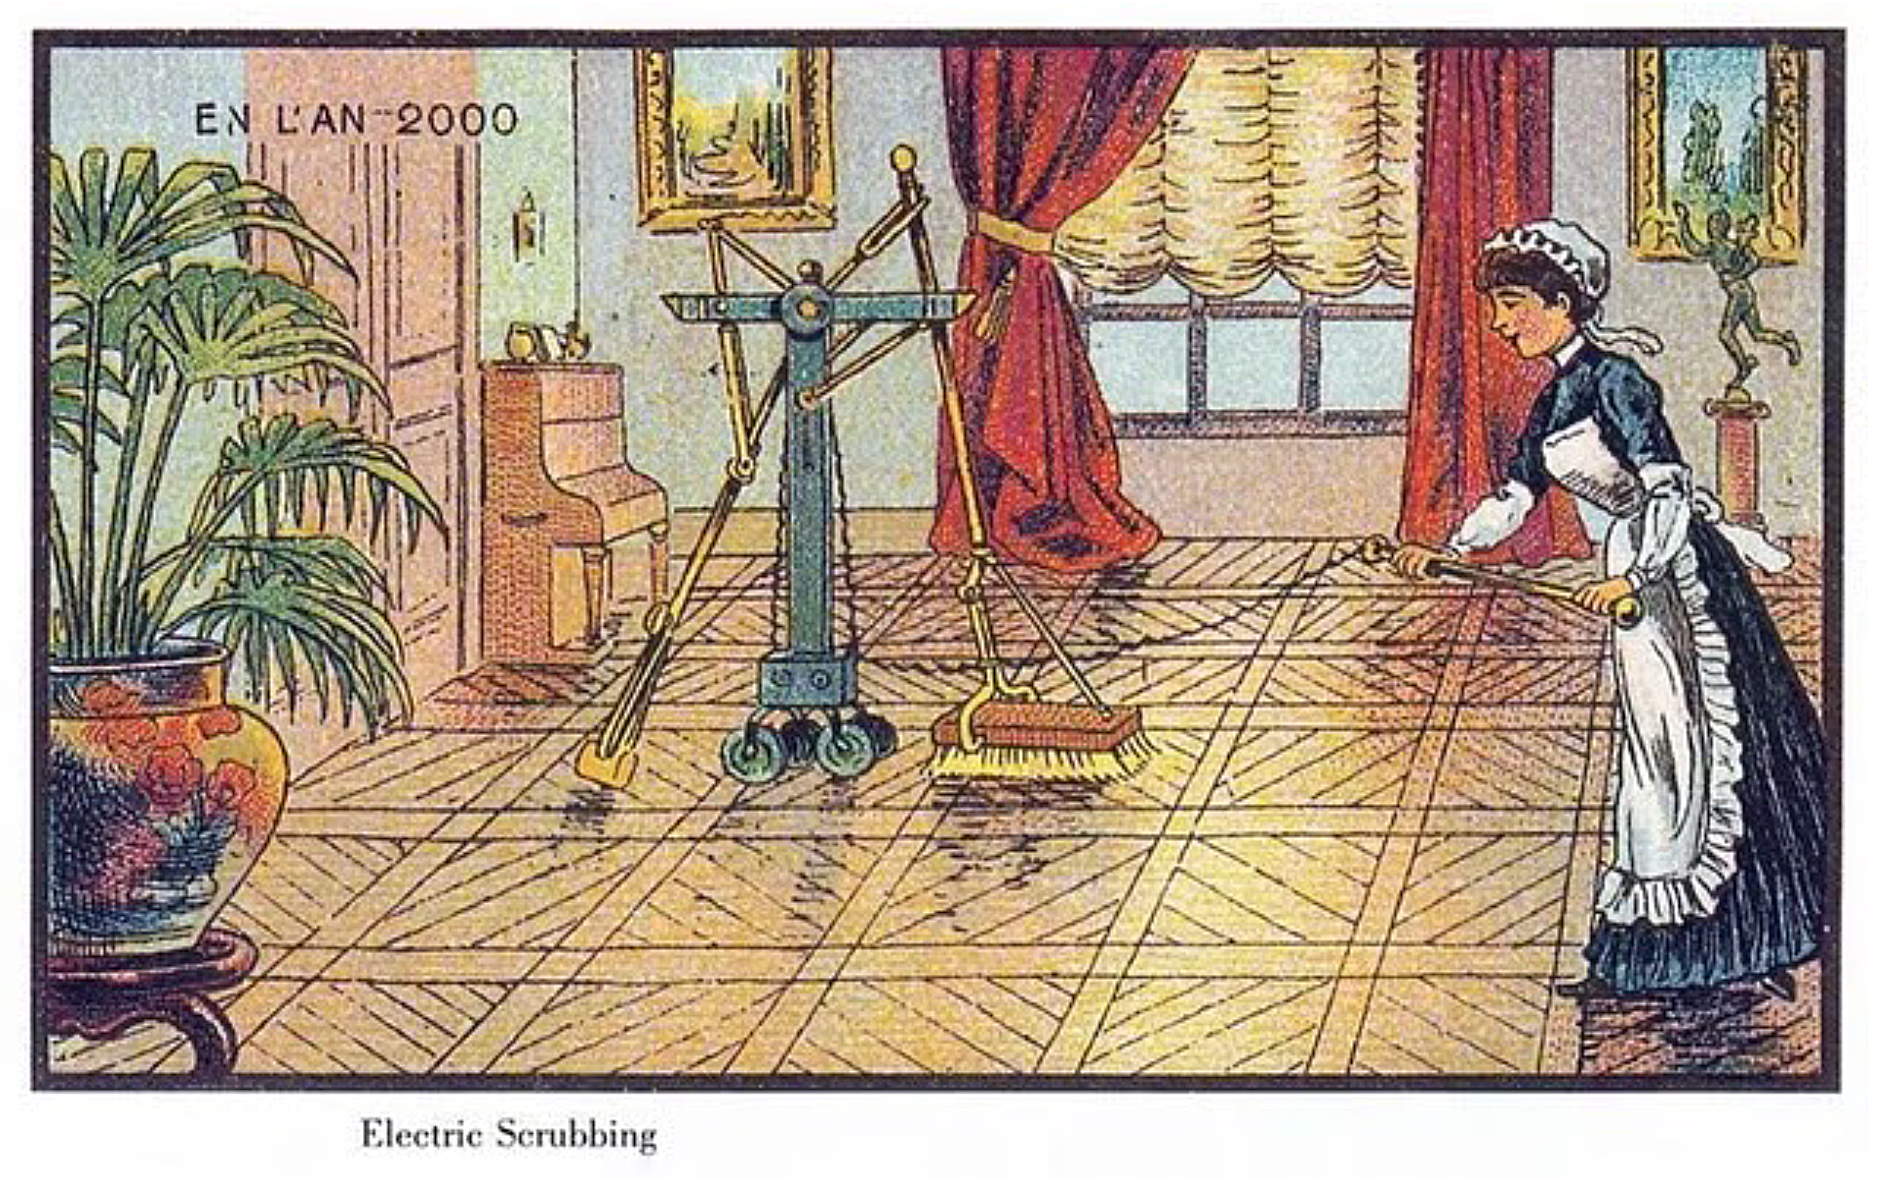 France in the Year 2000 cartoon - electric scrubbing